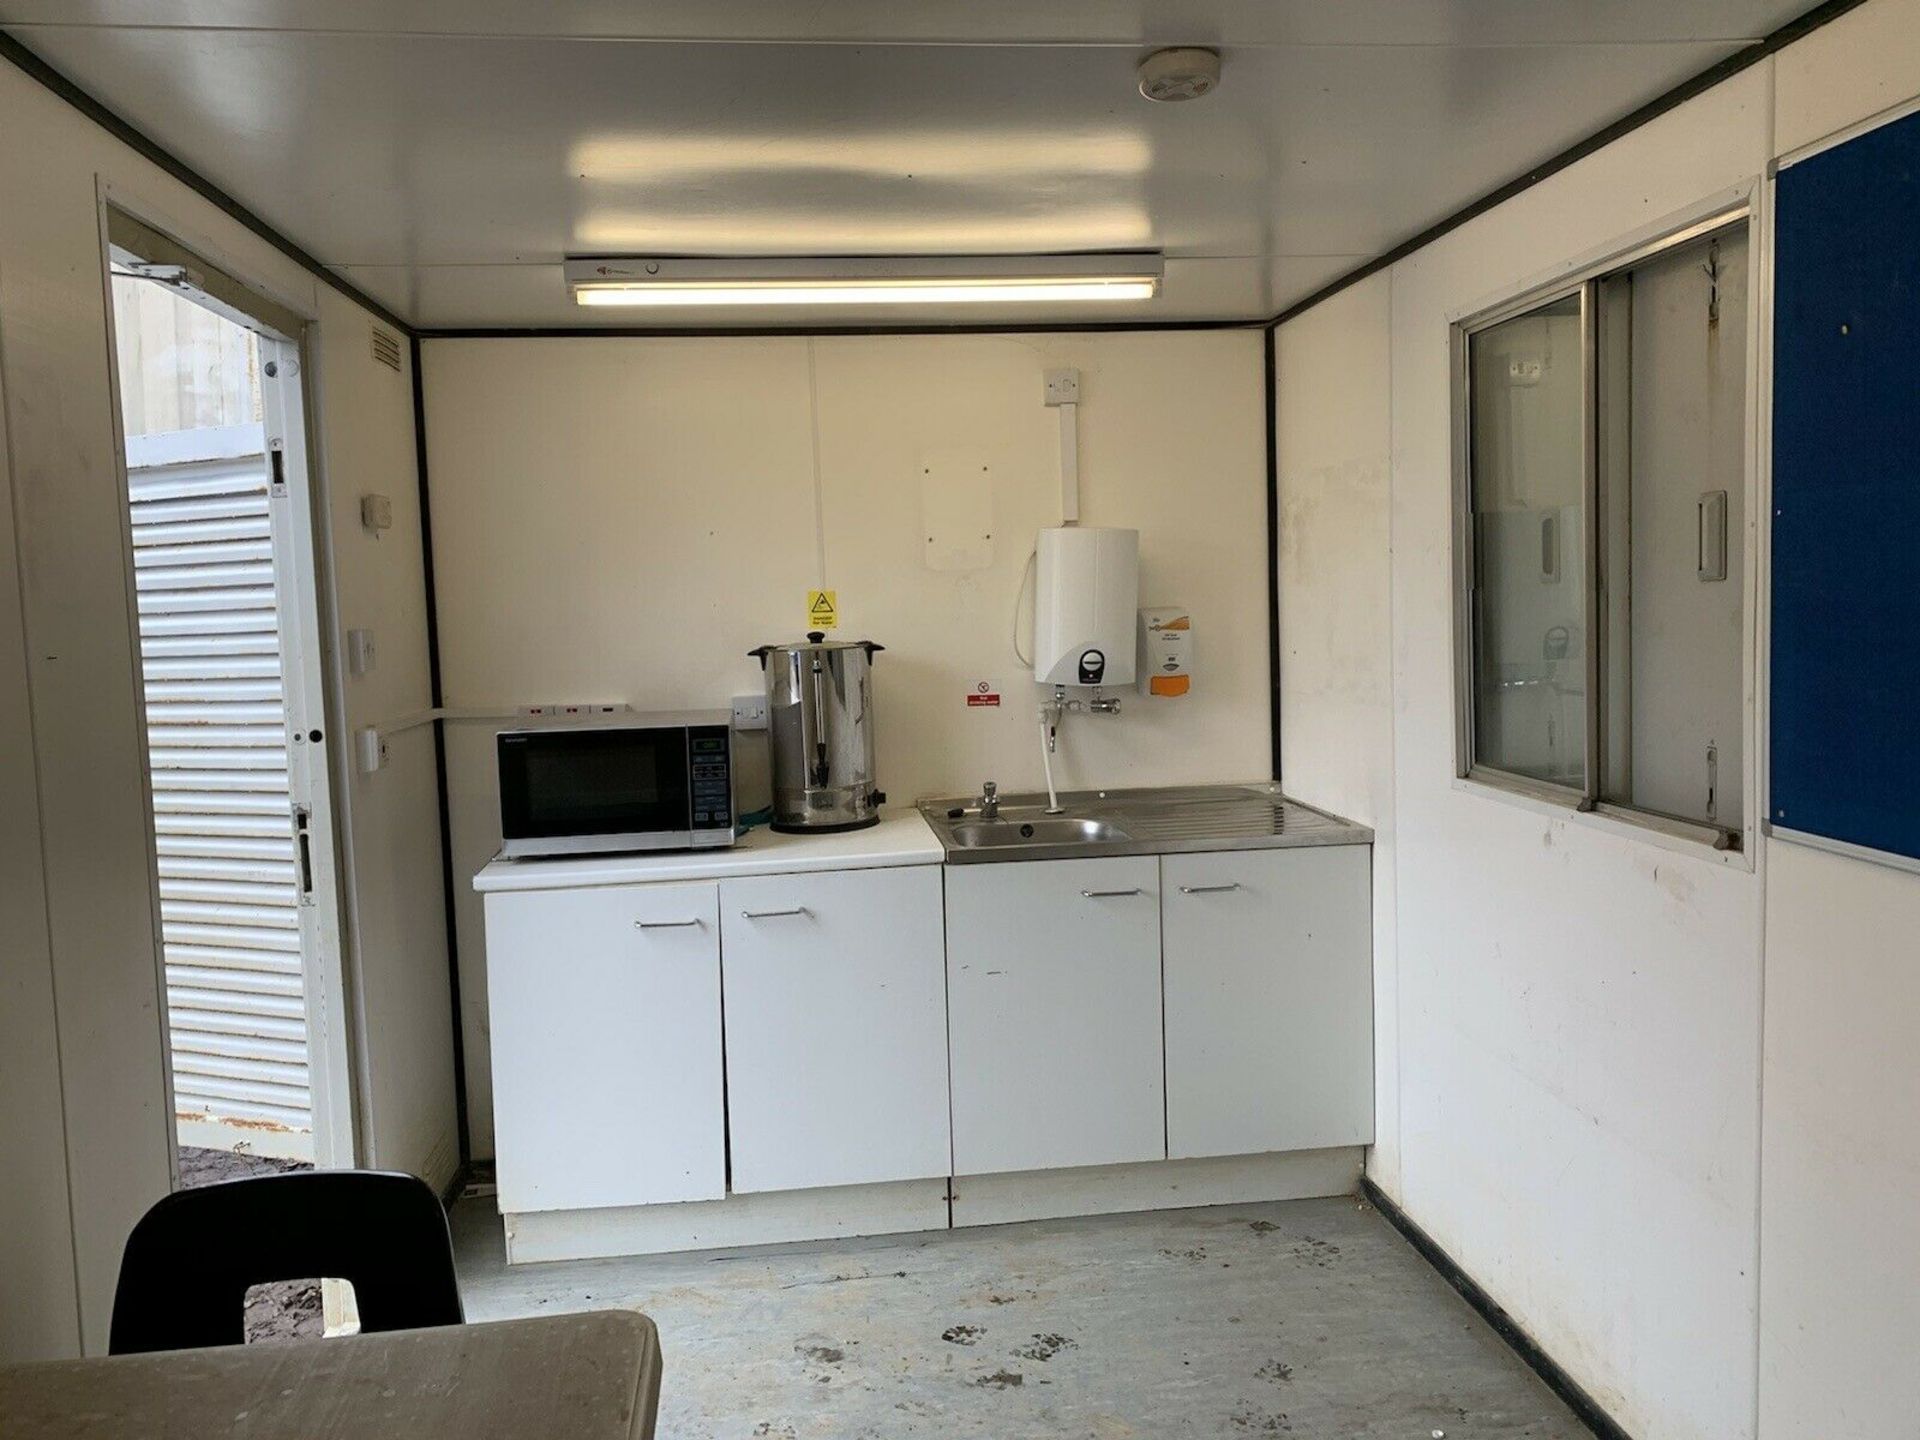 Site Welfare Unit Portable Cabin Office Canteen Co - Image 7 of 9